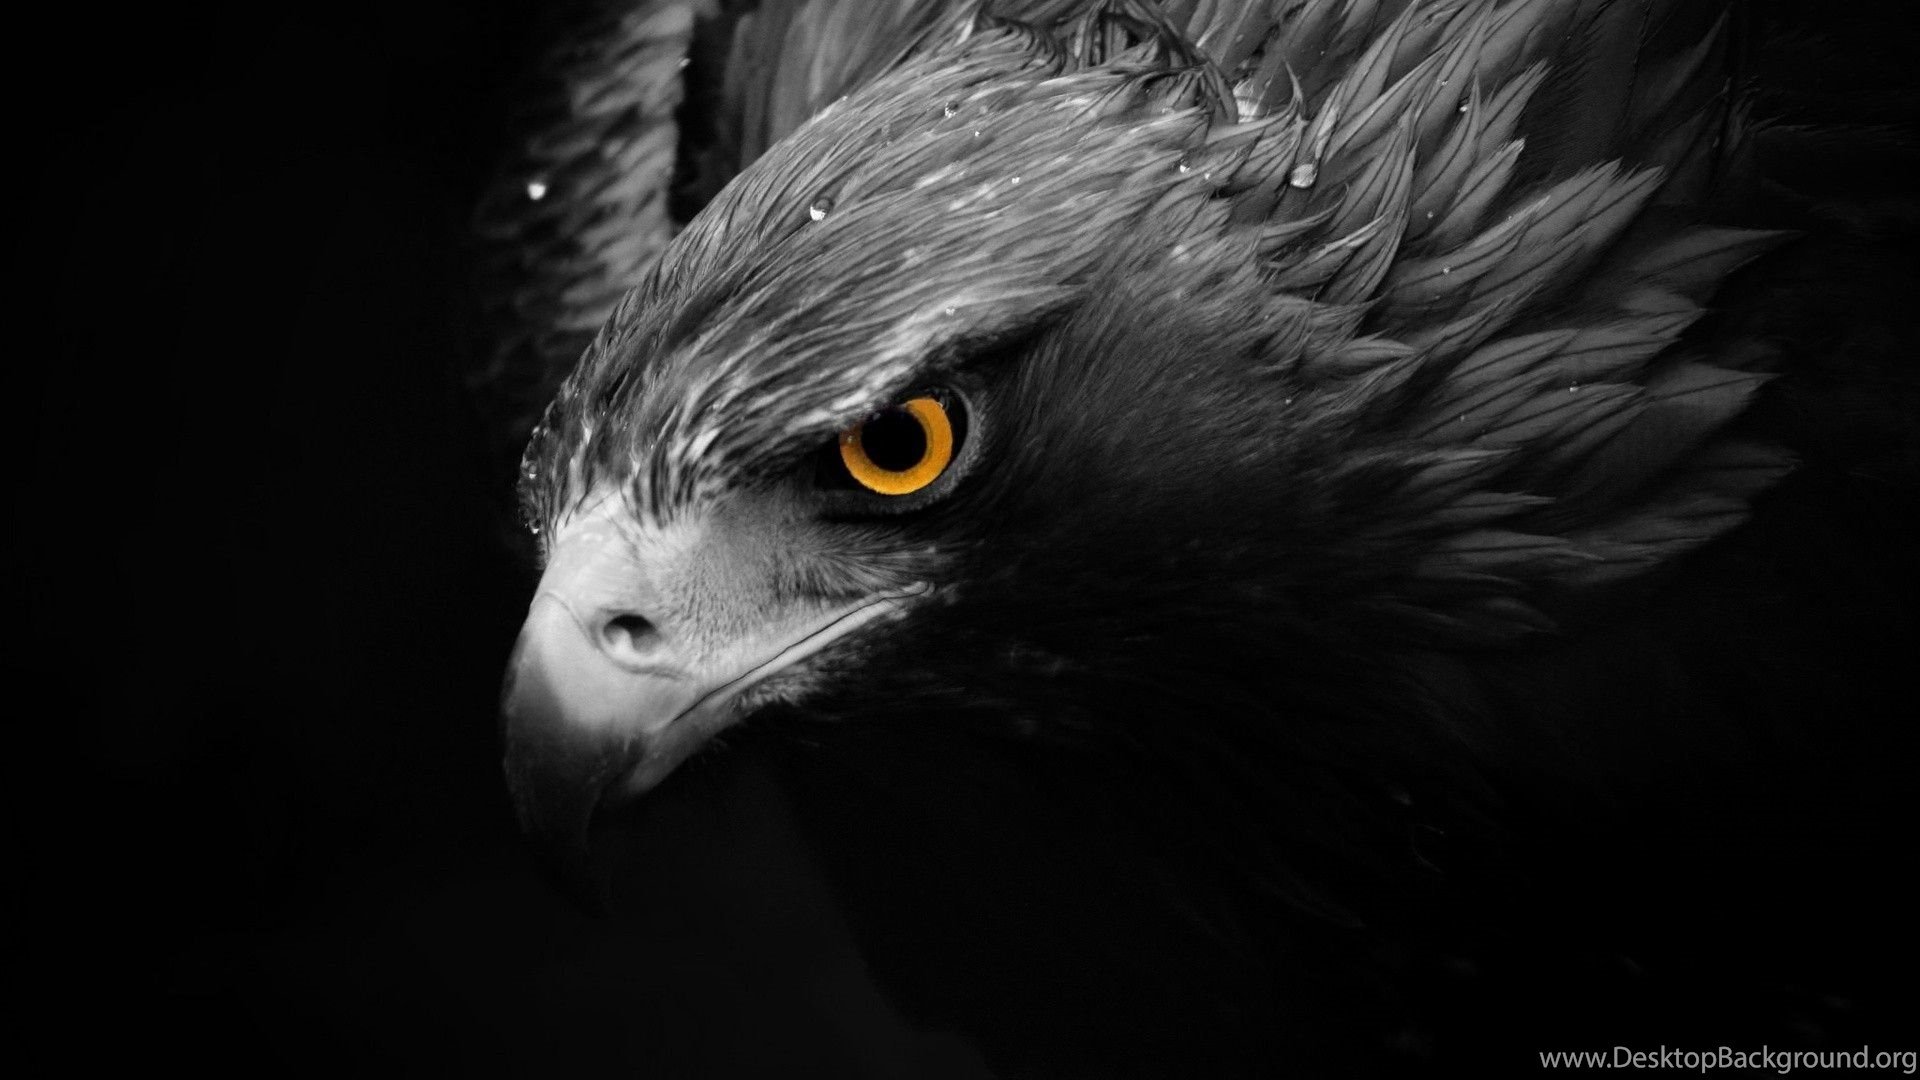 Download Black And White Eagle High Quality Wide HD Wallpaper. Desktop Background